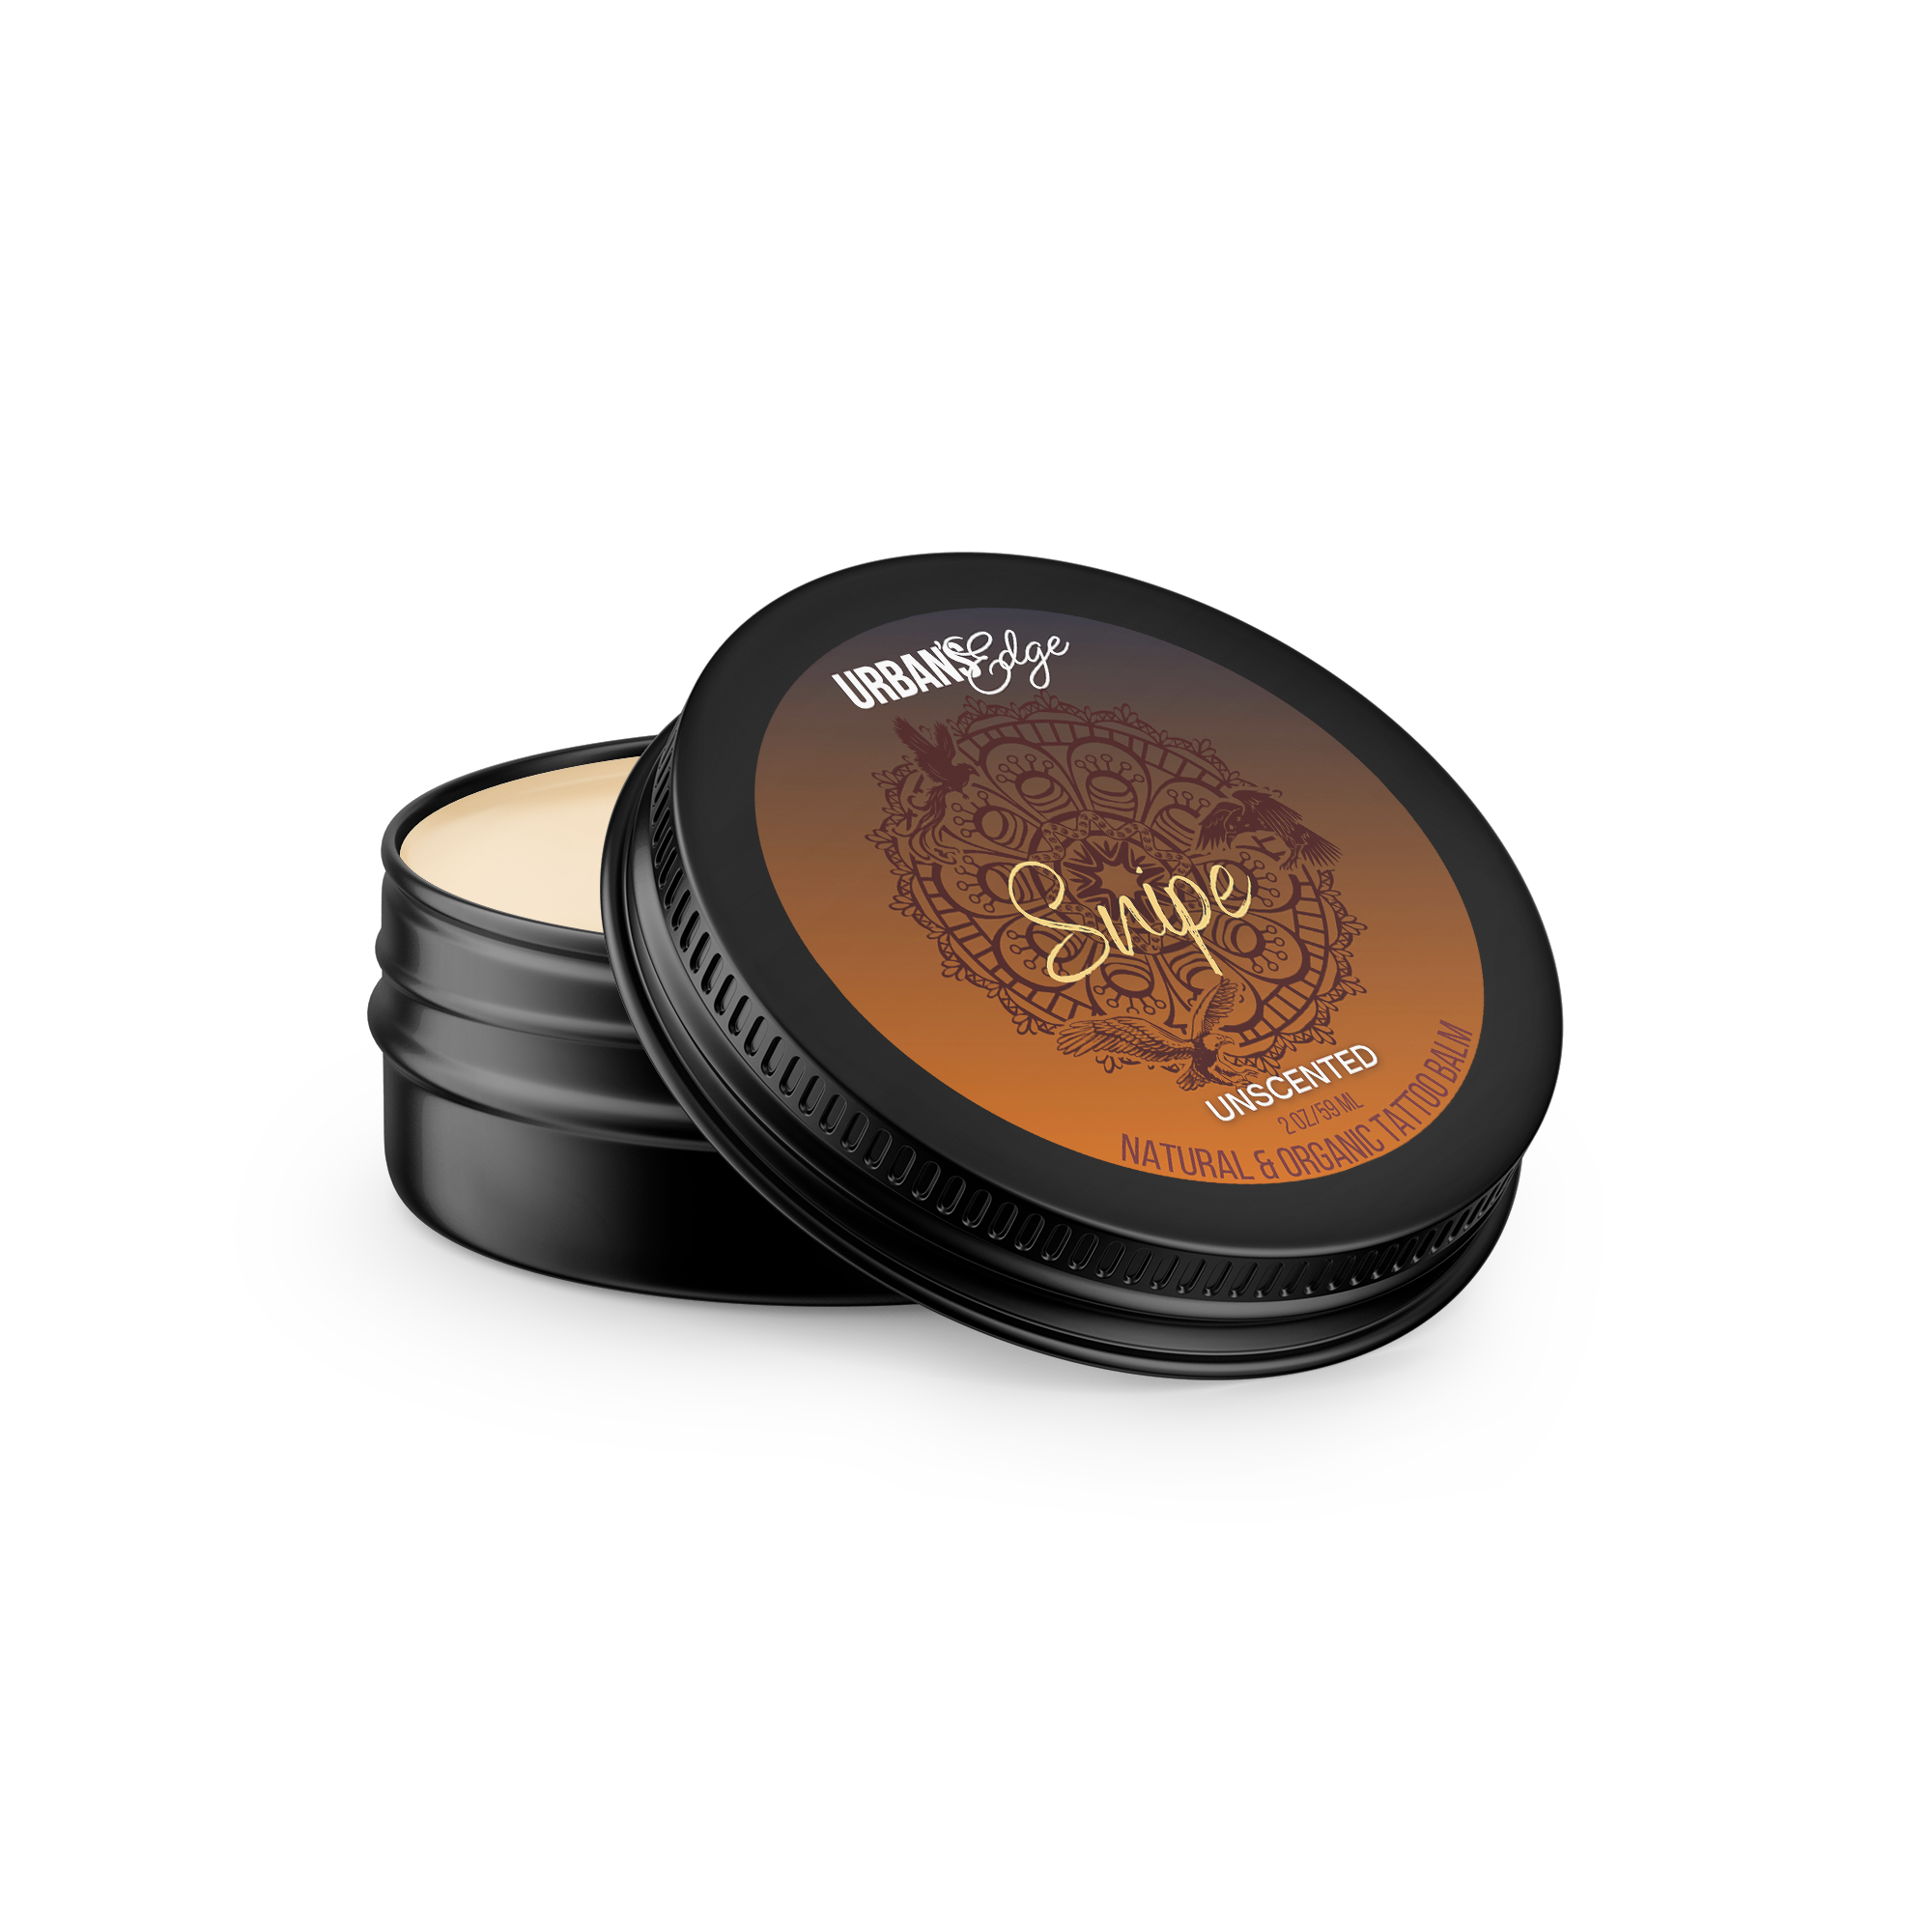 Snipe Unscented Tattoo Balm: Pure care for sensitive skin & vibrant tattoos. Vegan, natural & fragrance-free. Deeply hydrates, promotes healing & enhances color. Made in USA, order Snipe now!